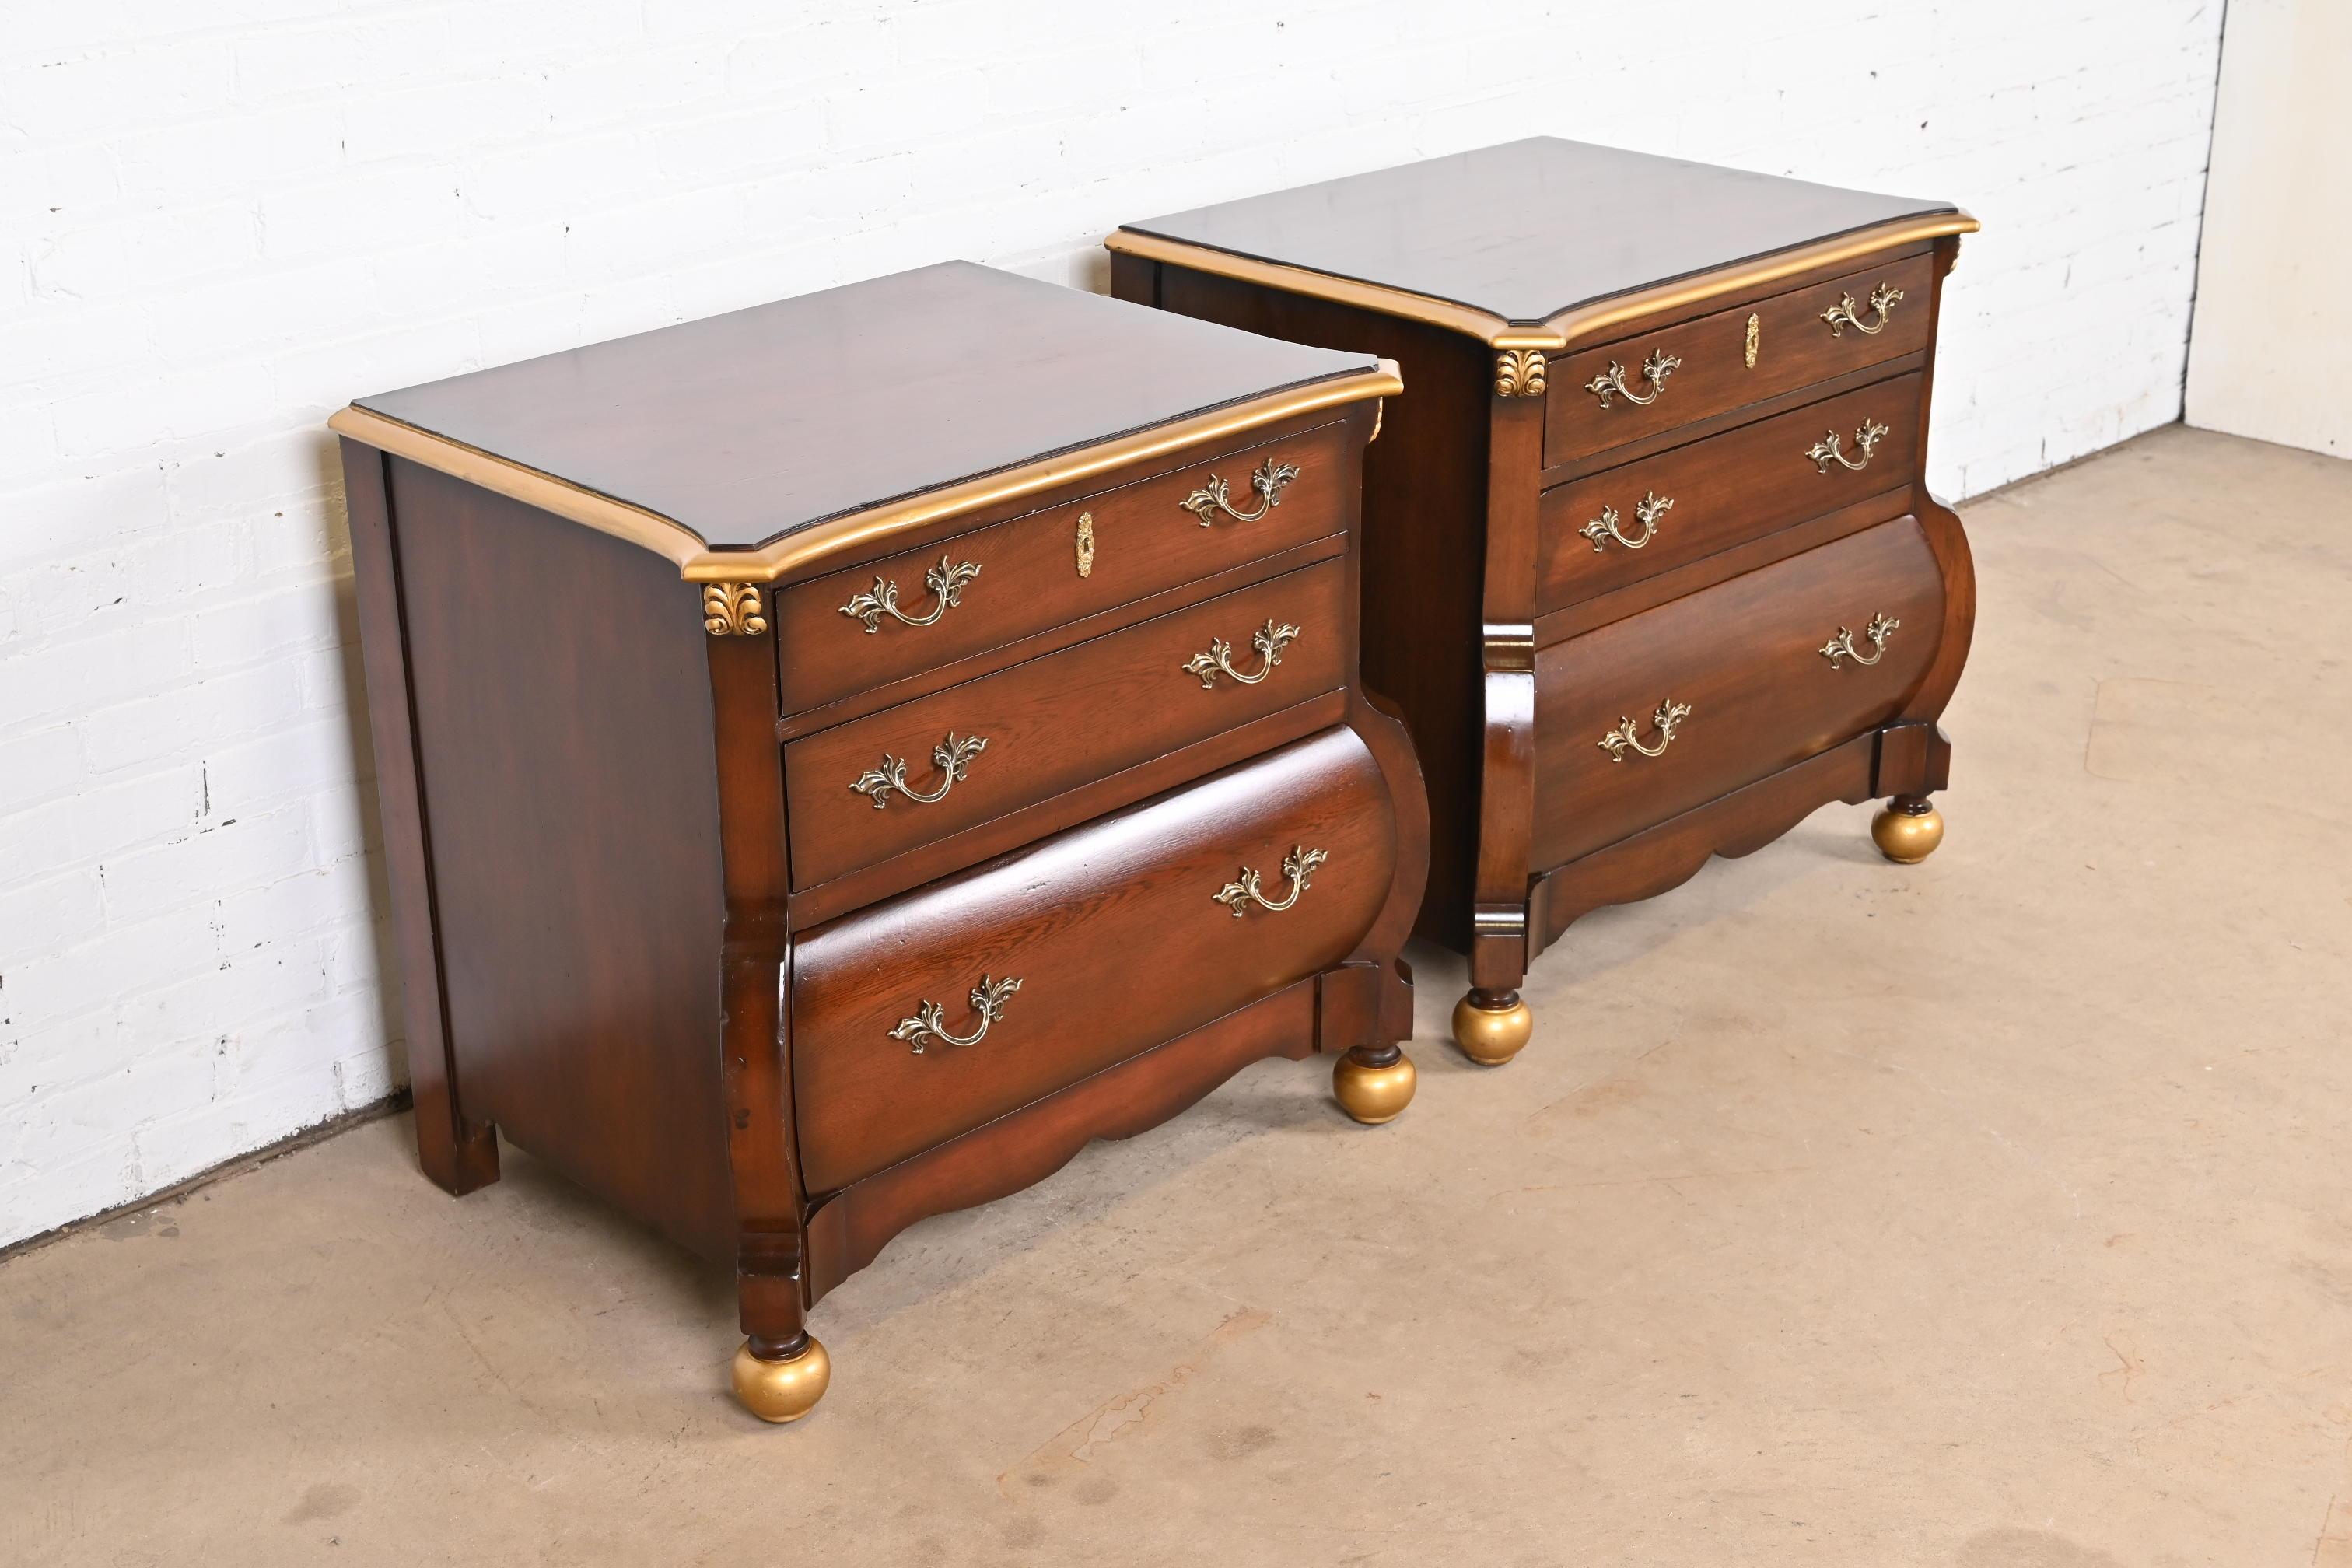 Ralph Lauren Italian Louis XV Mahogany Bombay Form Bedside Chests, Pair In Good Condition For Sale In South Bend, IN